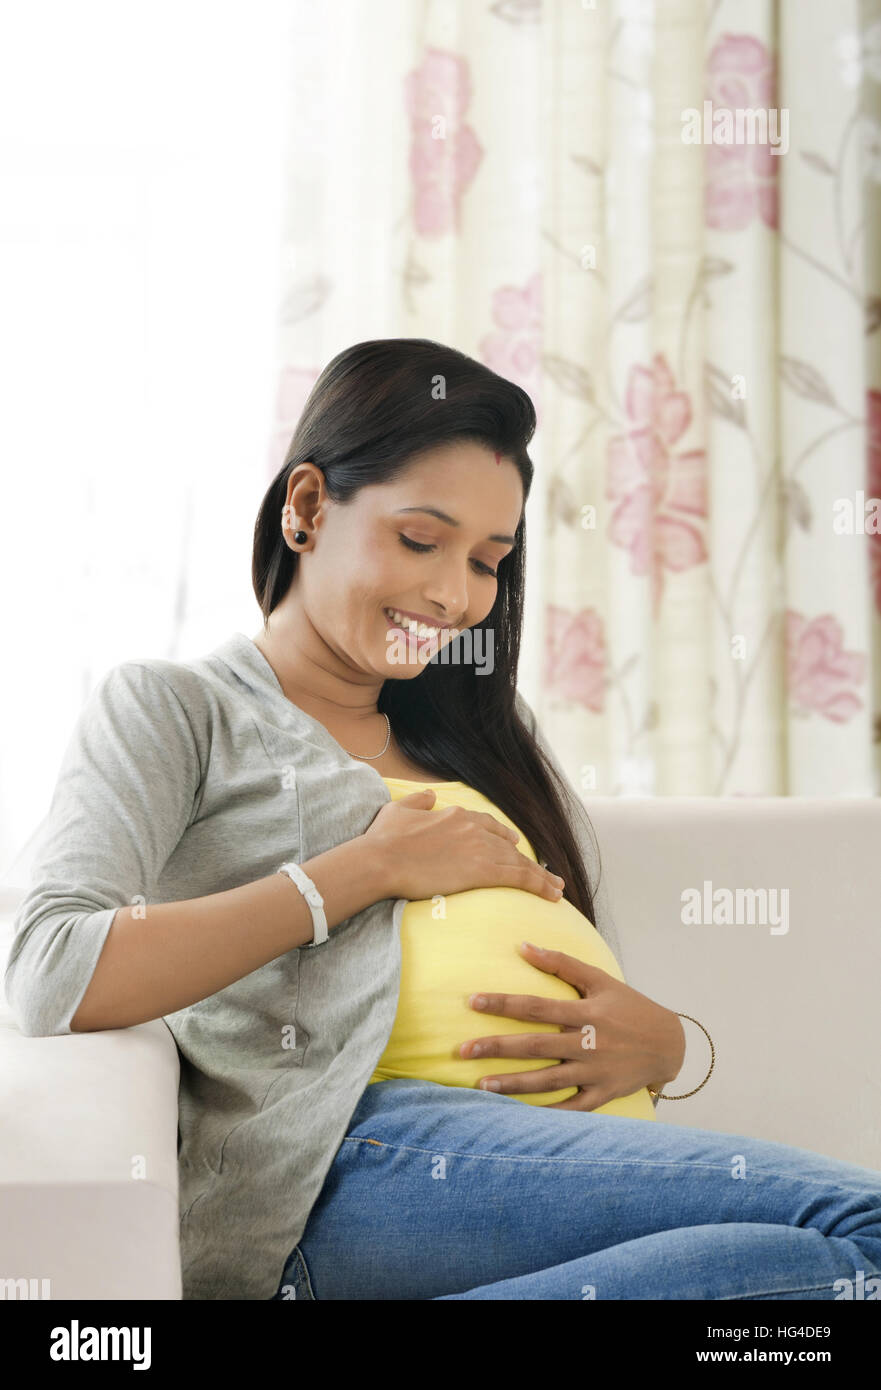 Pregnant woman holding her belly Banque D'Images